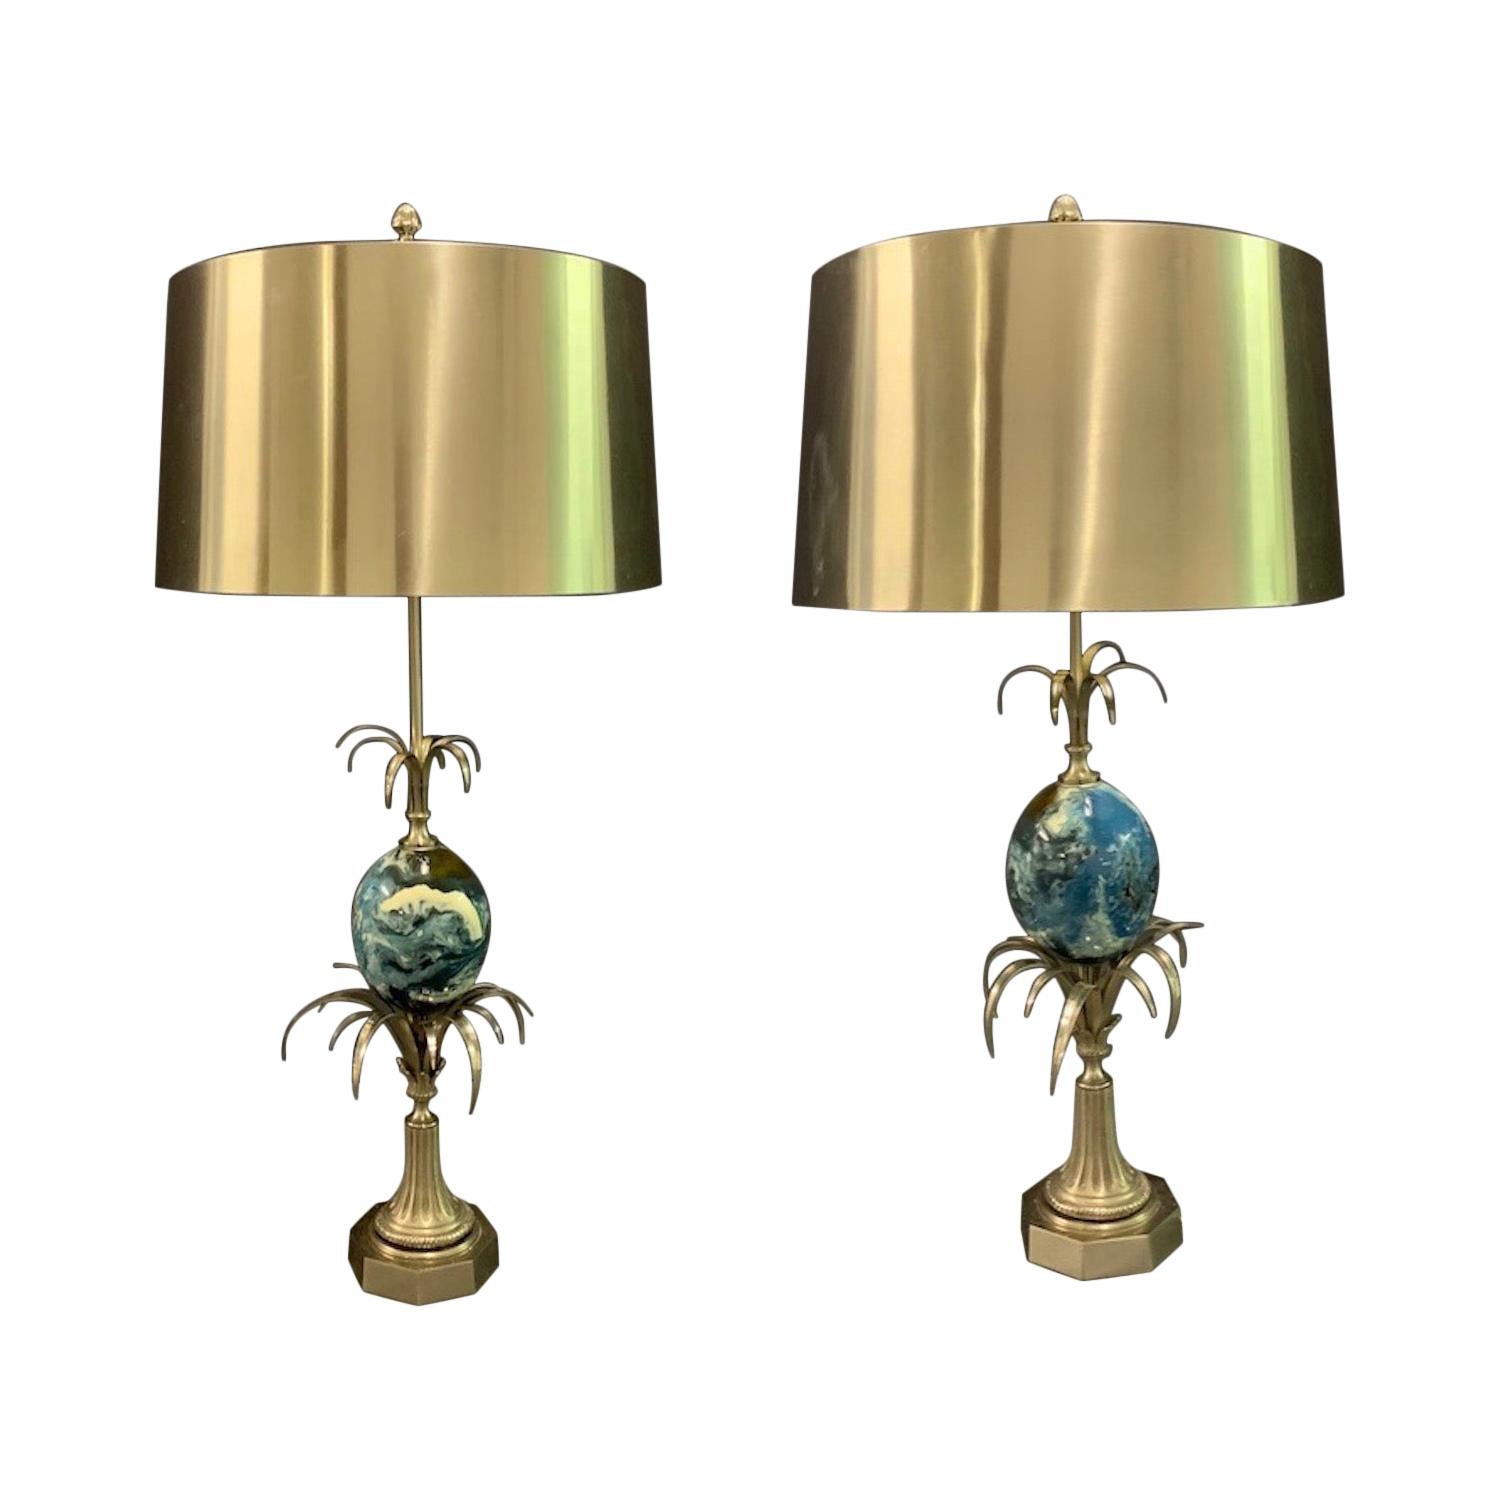 Rare Pair of Signed Maison Charles Table Lamps